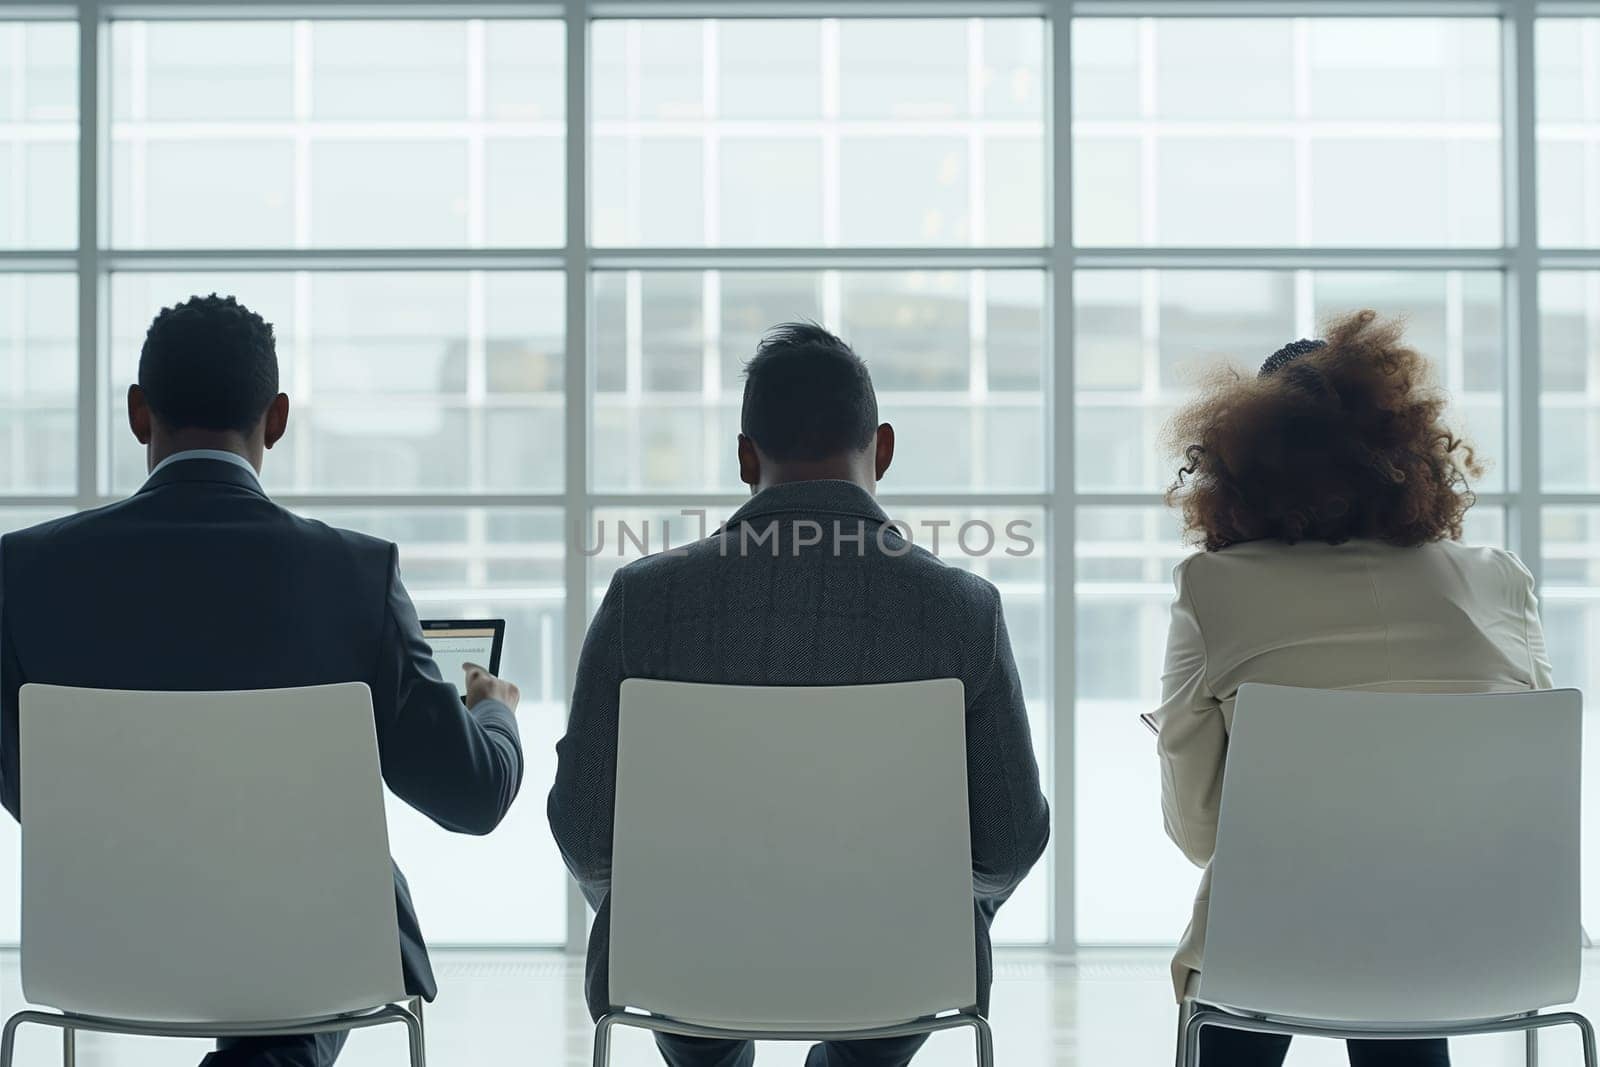 A group of individuals are seated in chairs facing a rectangular window, sharing gestures and conversation during a work event. The glass reflects their silhouettes as they sit